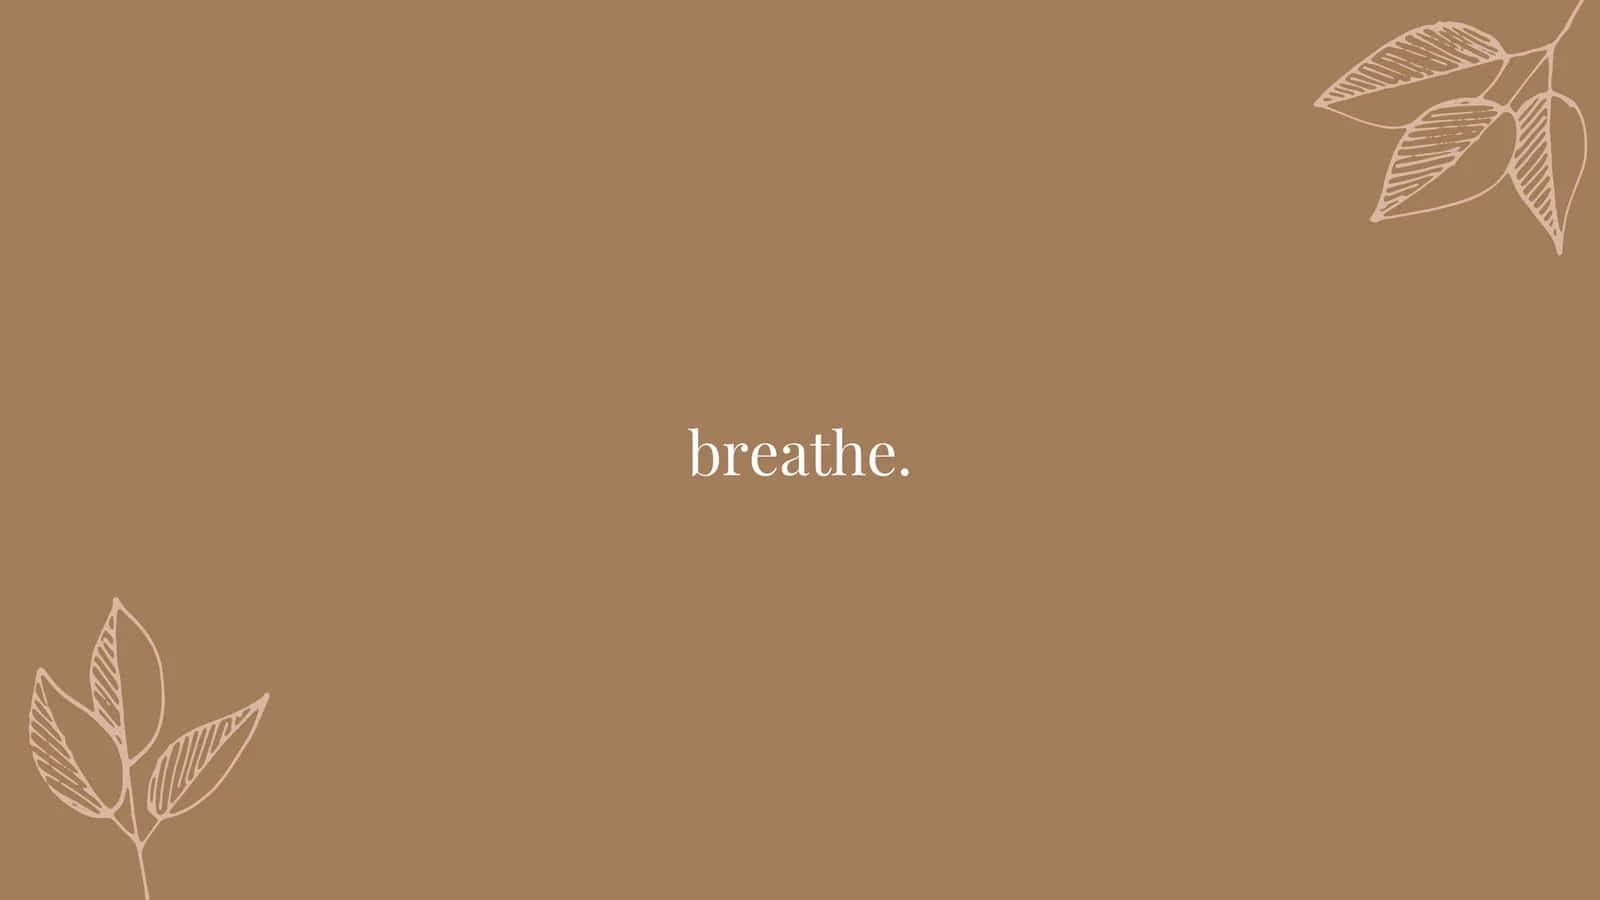 Breathe - A Beige Background With Leaves Background